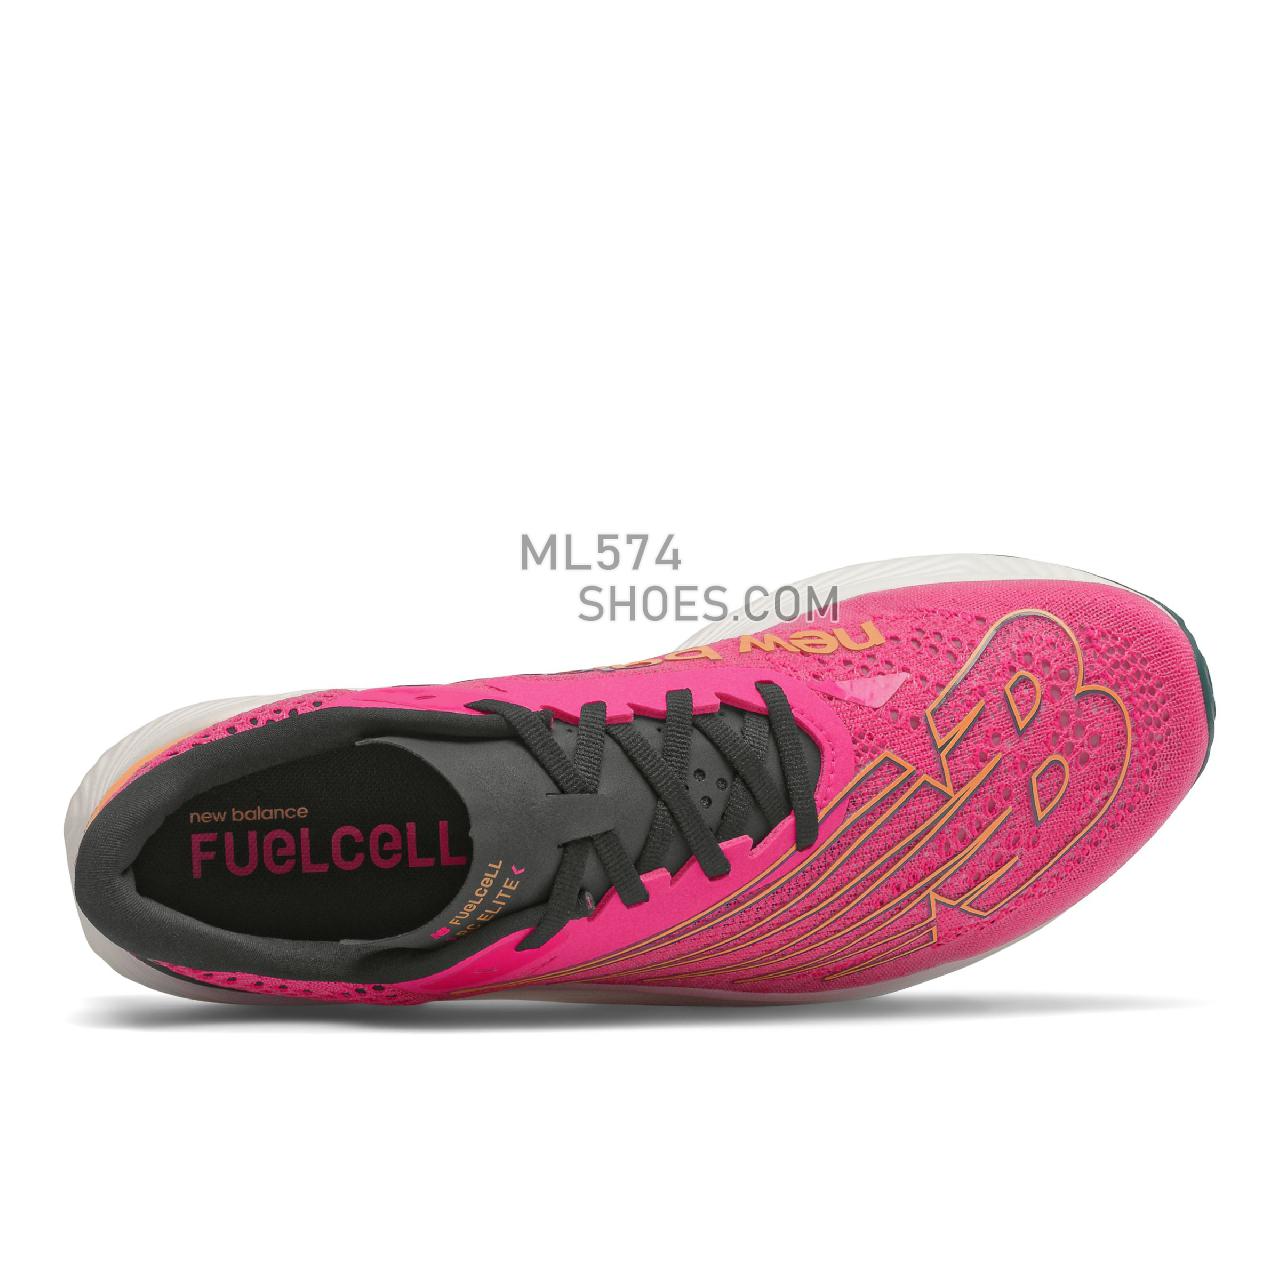 New Balance FuelCell RC Elite v2 - Men's Competition Running - Pink Glo with Black - MRCELPB2